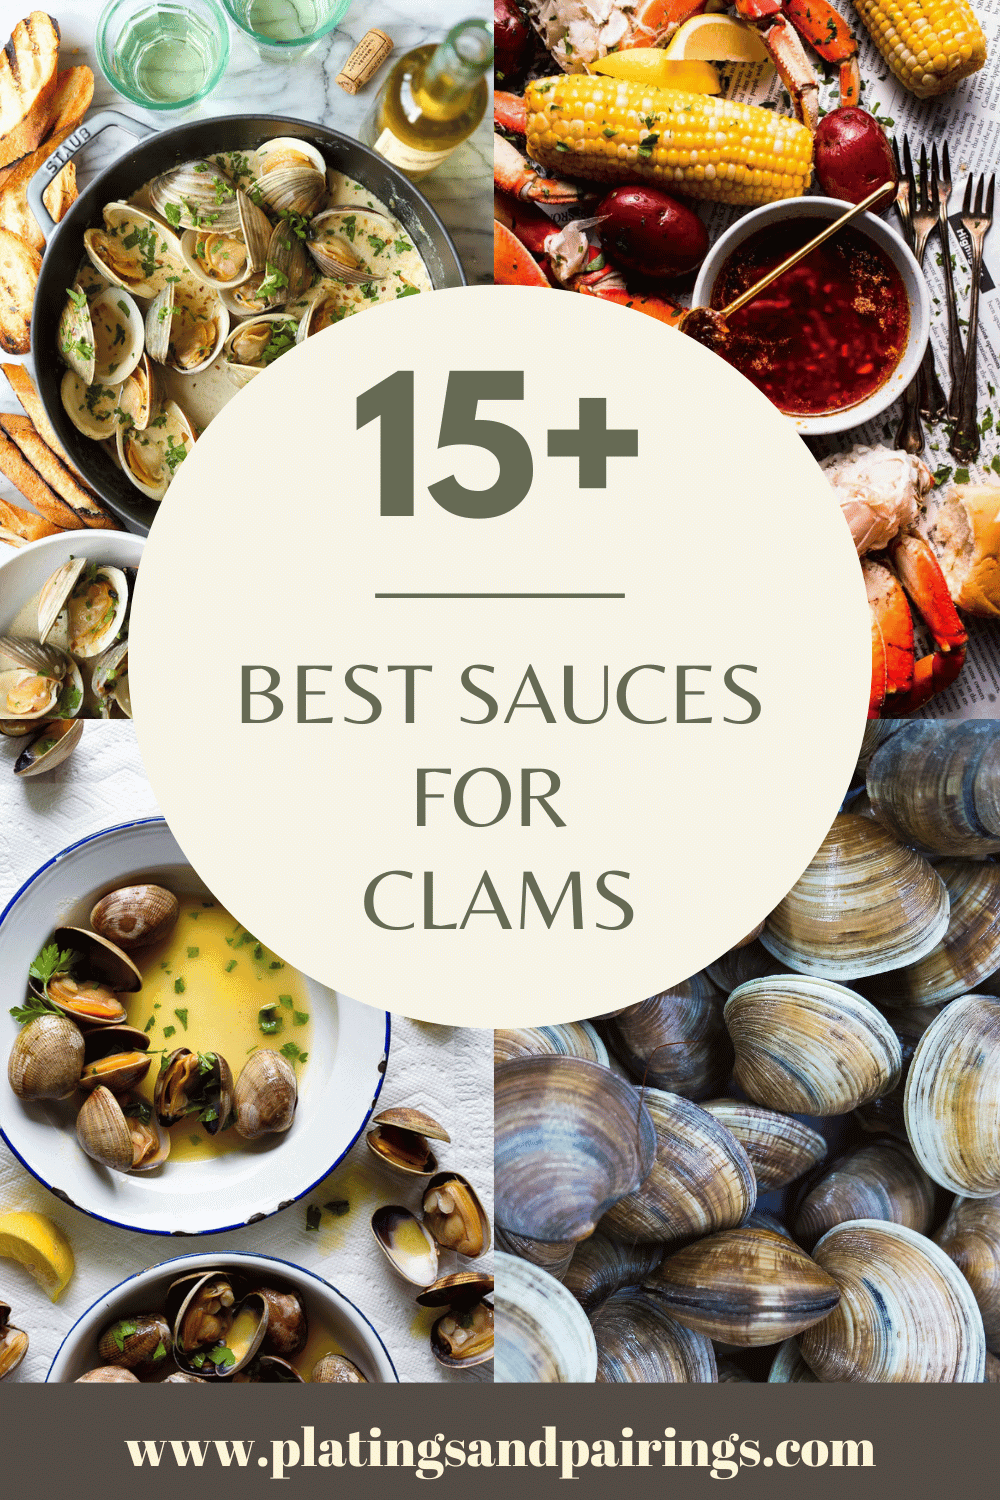 Collage of sauces for clams with text overlay.